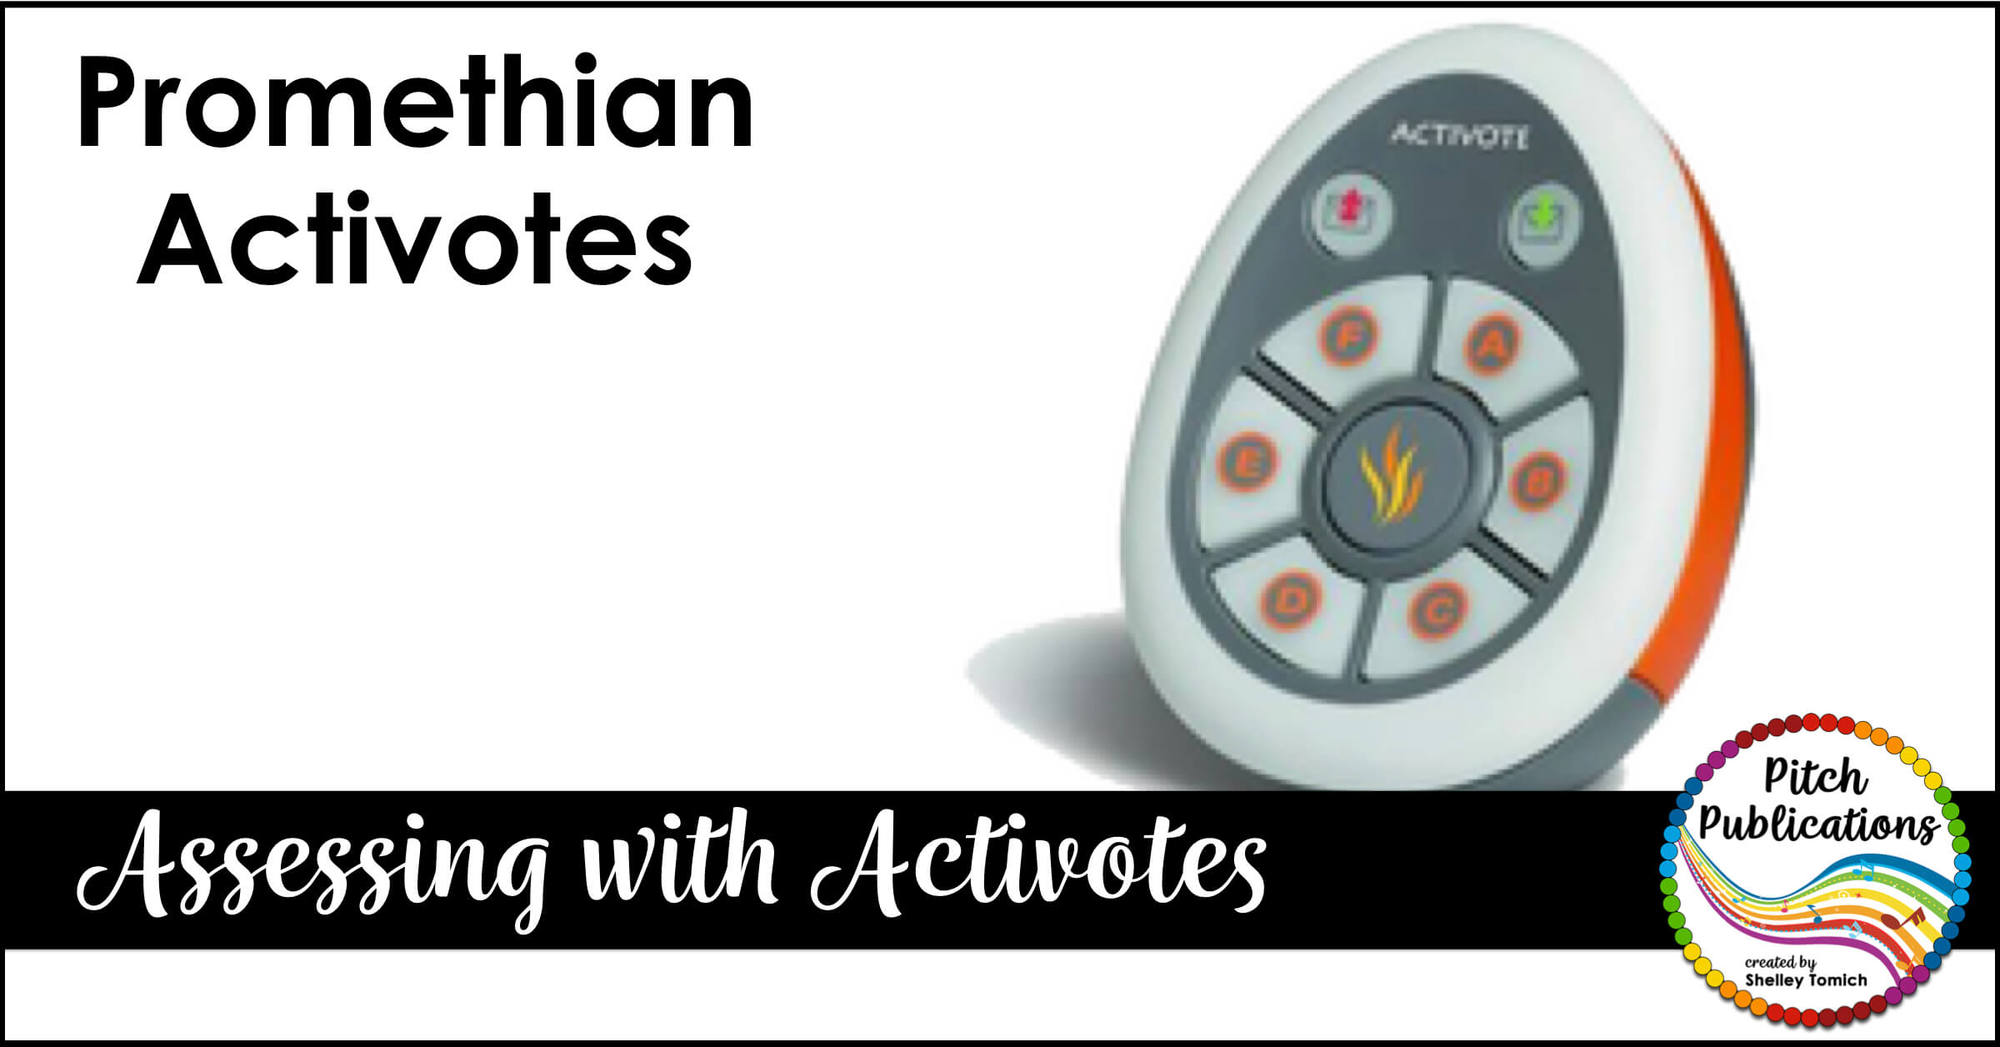 Picture of activote (remote) with text " Promethean Activotes Get Started Guide"